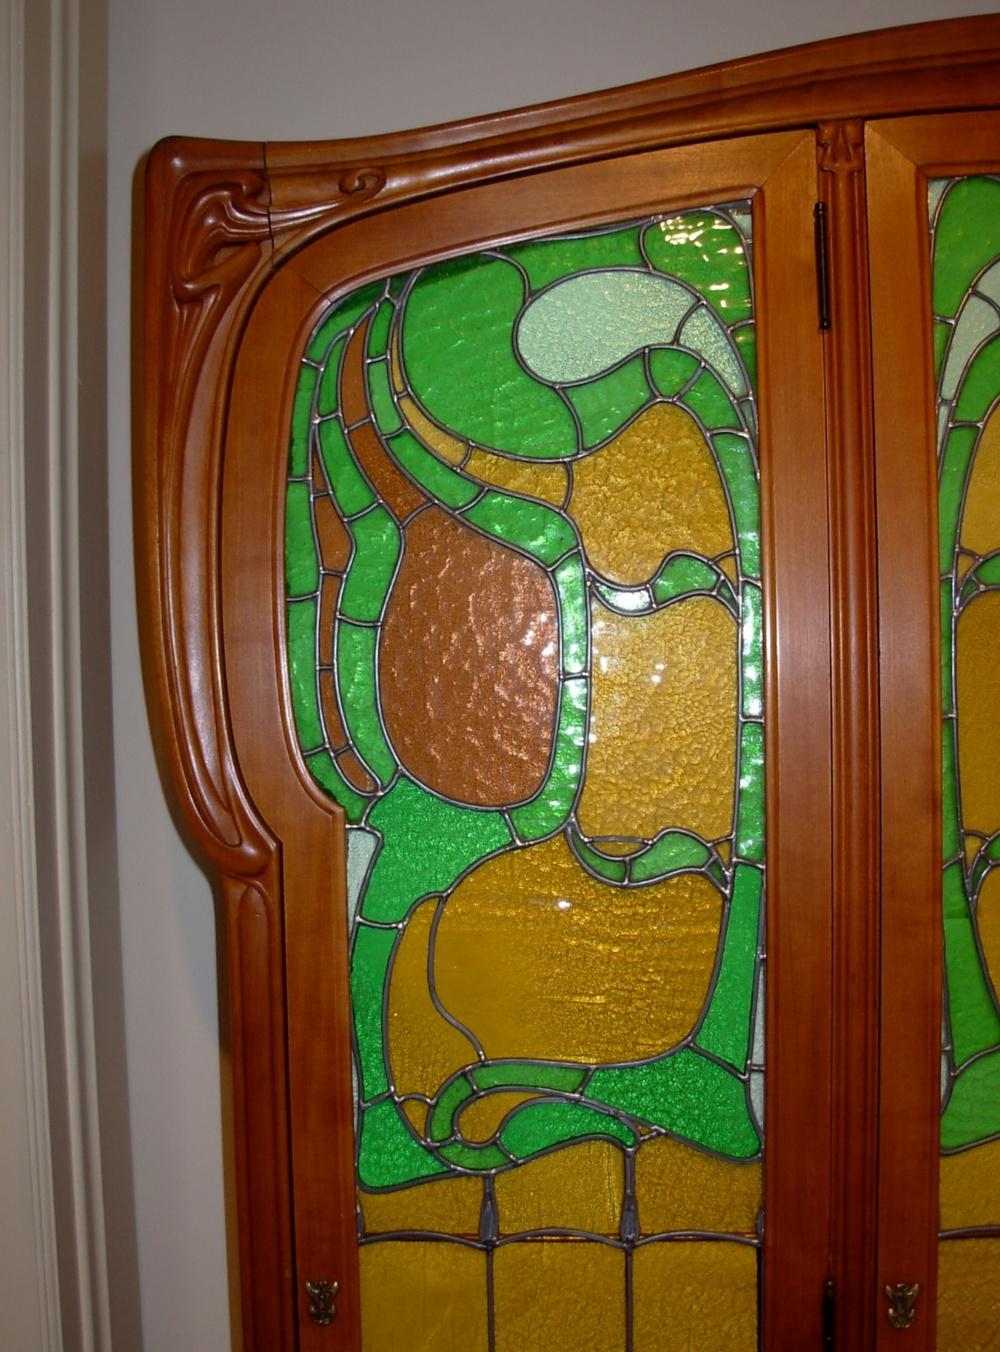 French Art Nouveau cabinet by Edouard Colonna, 1900-1901, identified in numerous period sources as Bibliotheque Victor Hugo. It is 57